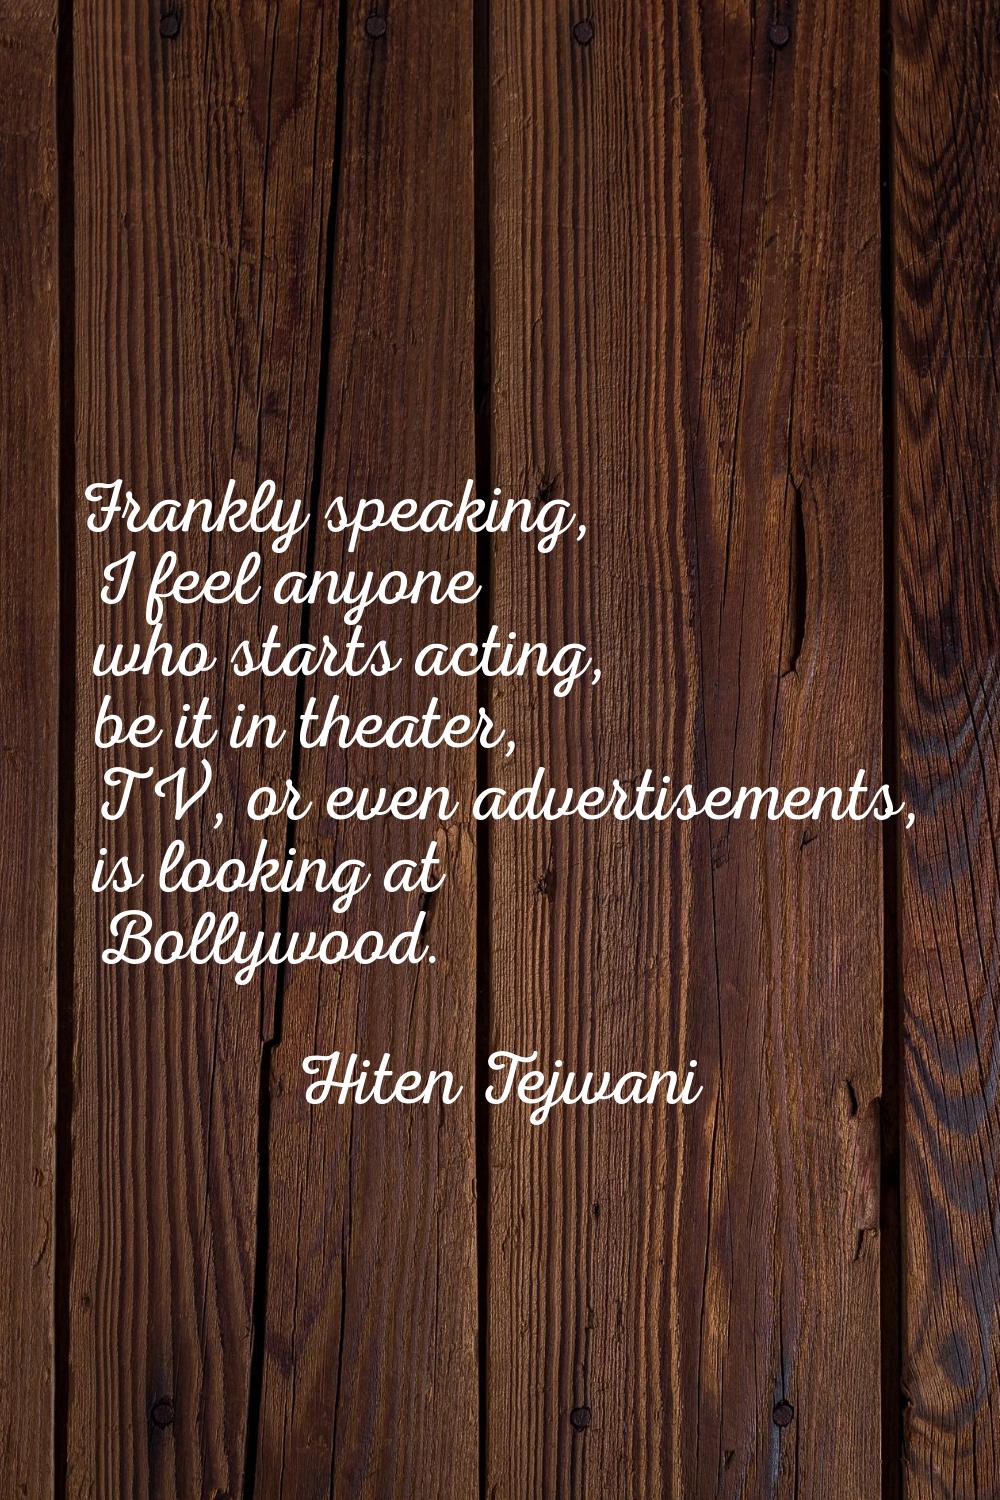 Frankly speaking, I feel anyone who starts acting, be it in theater, TV, or even advertisements, is